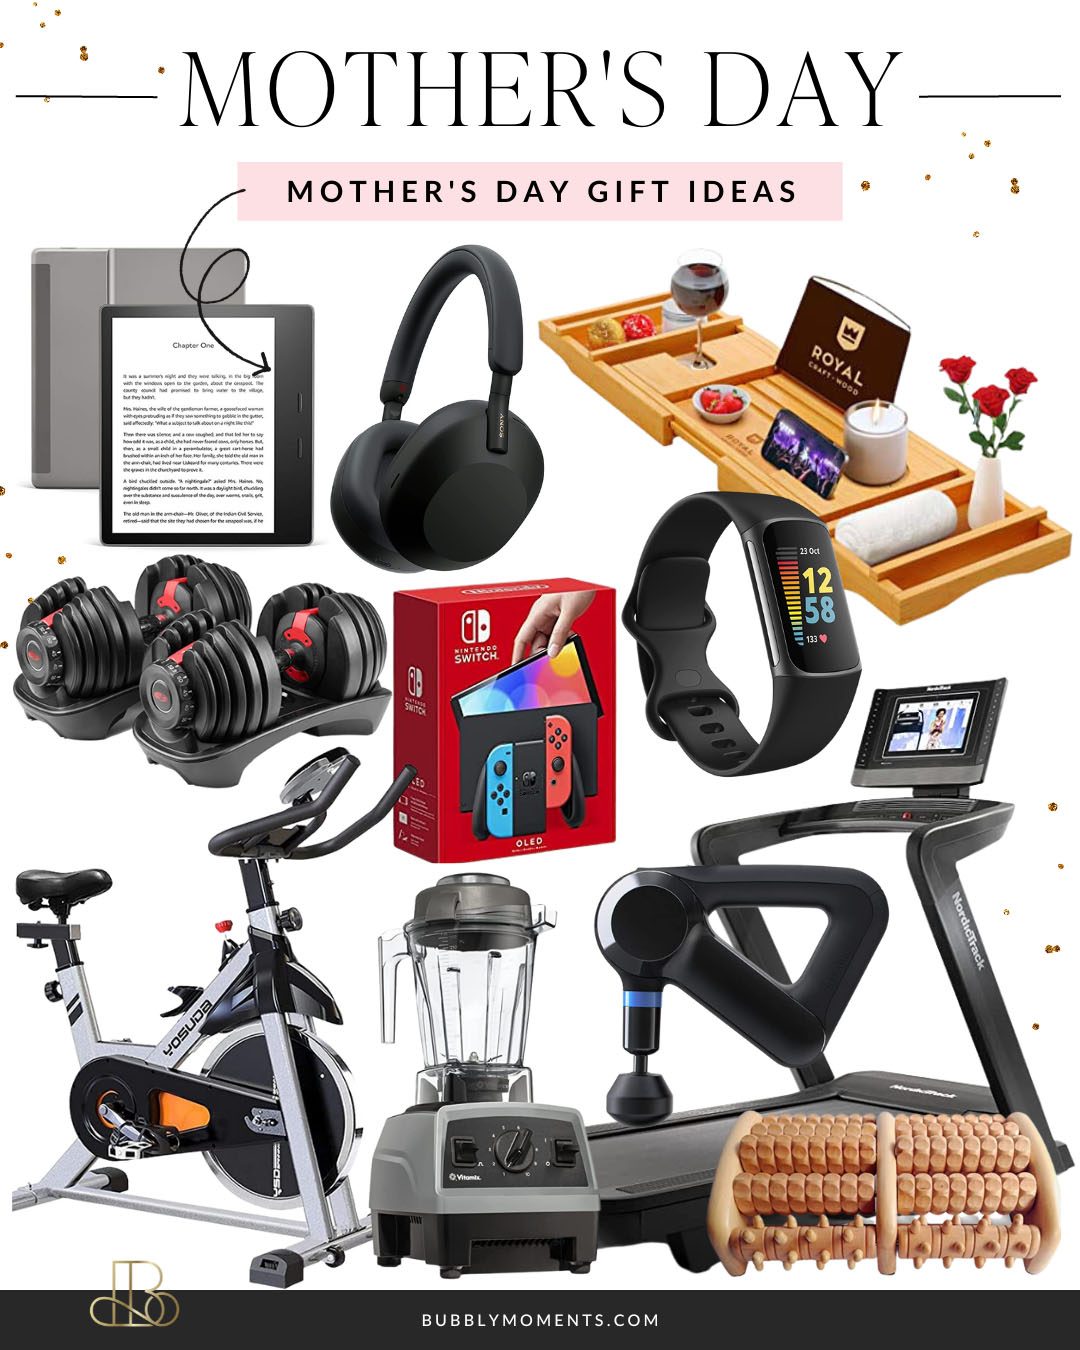 https://www.bubblymoments.com/wp-content/uploads/2023/05/bubbly-moments-mothers-day-gift-ideas-2023-32.jpg